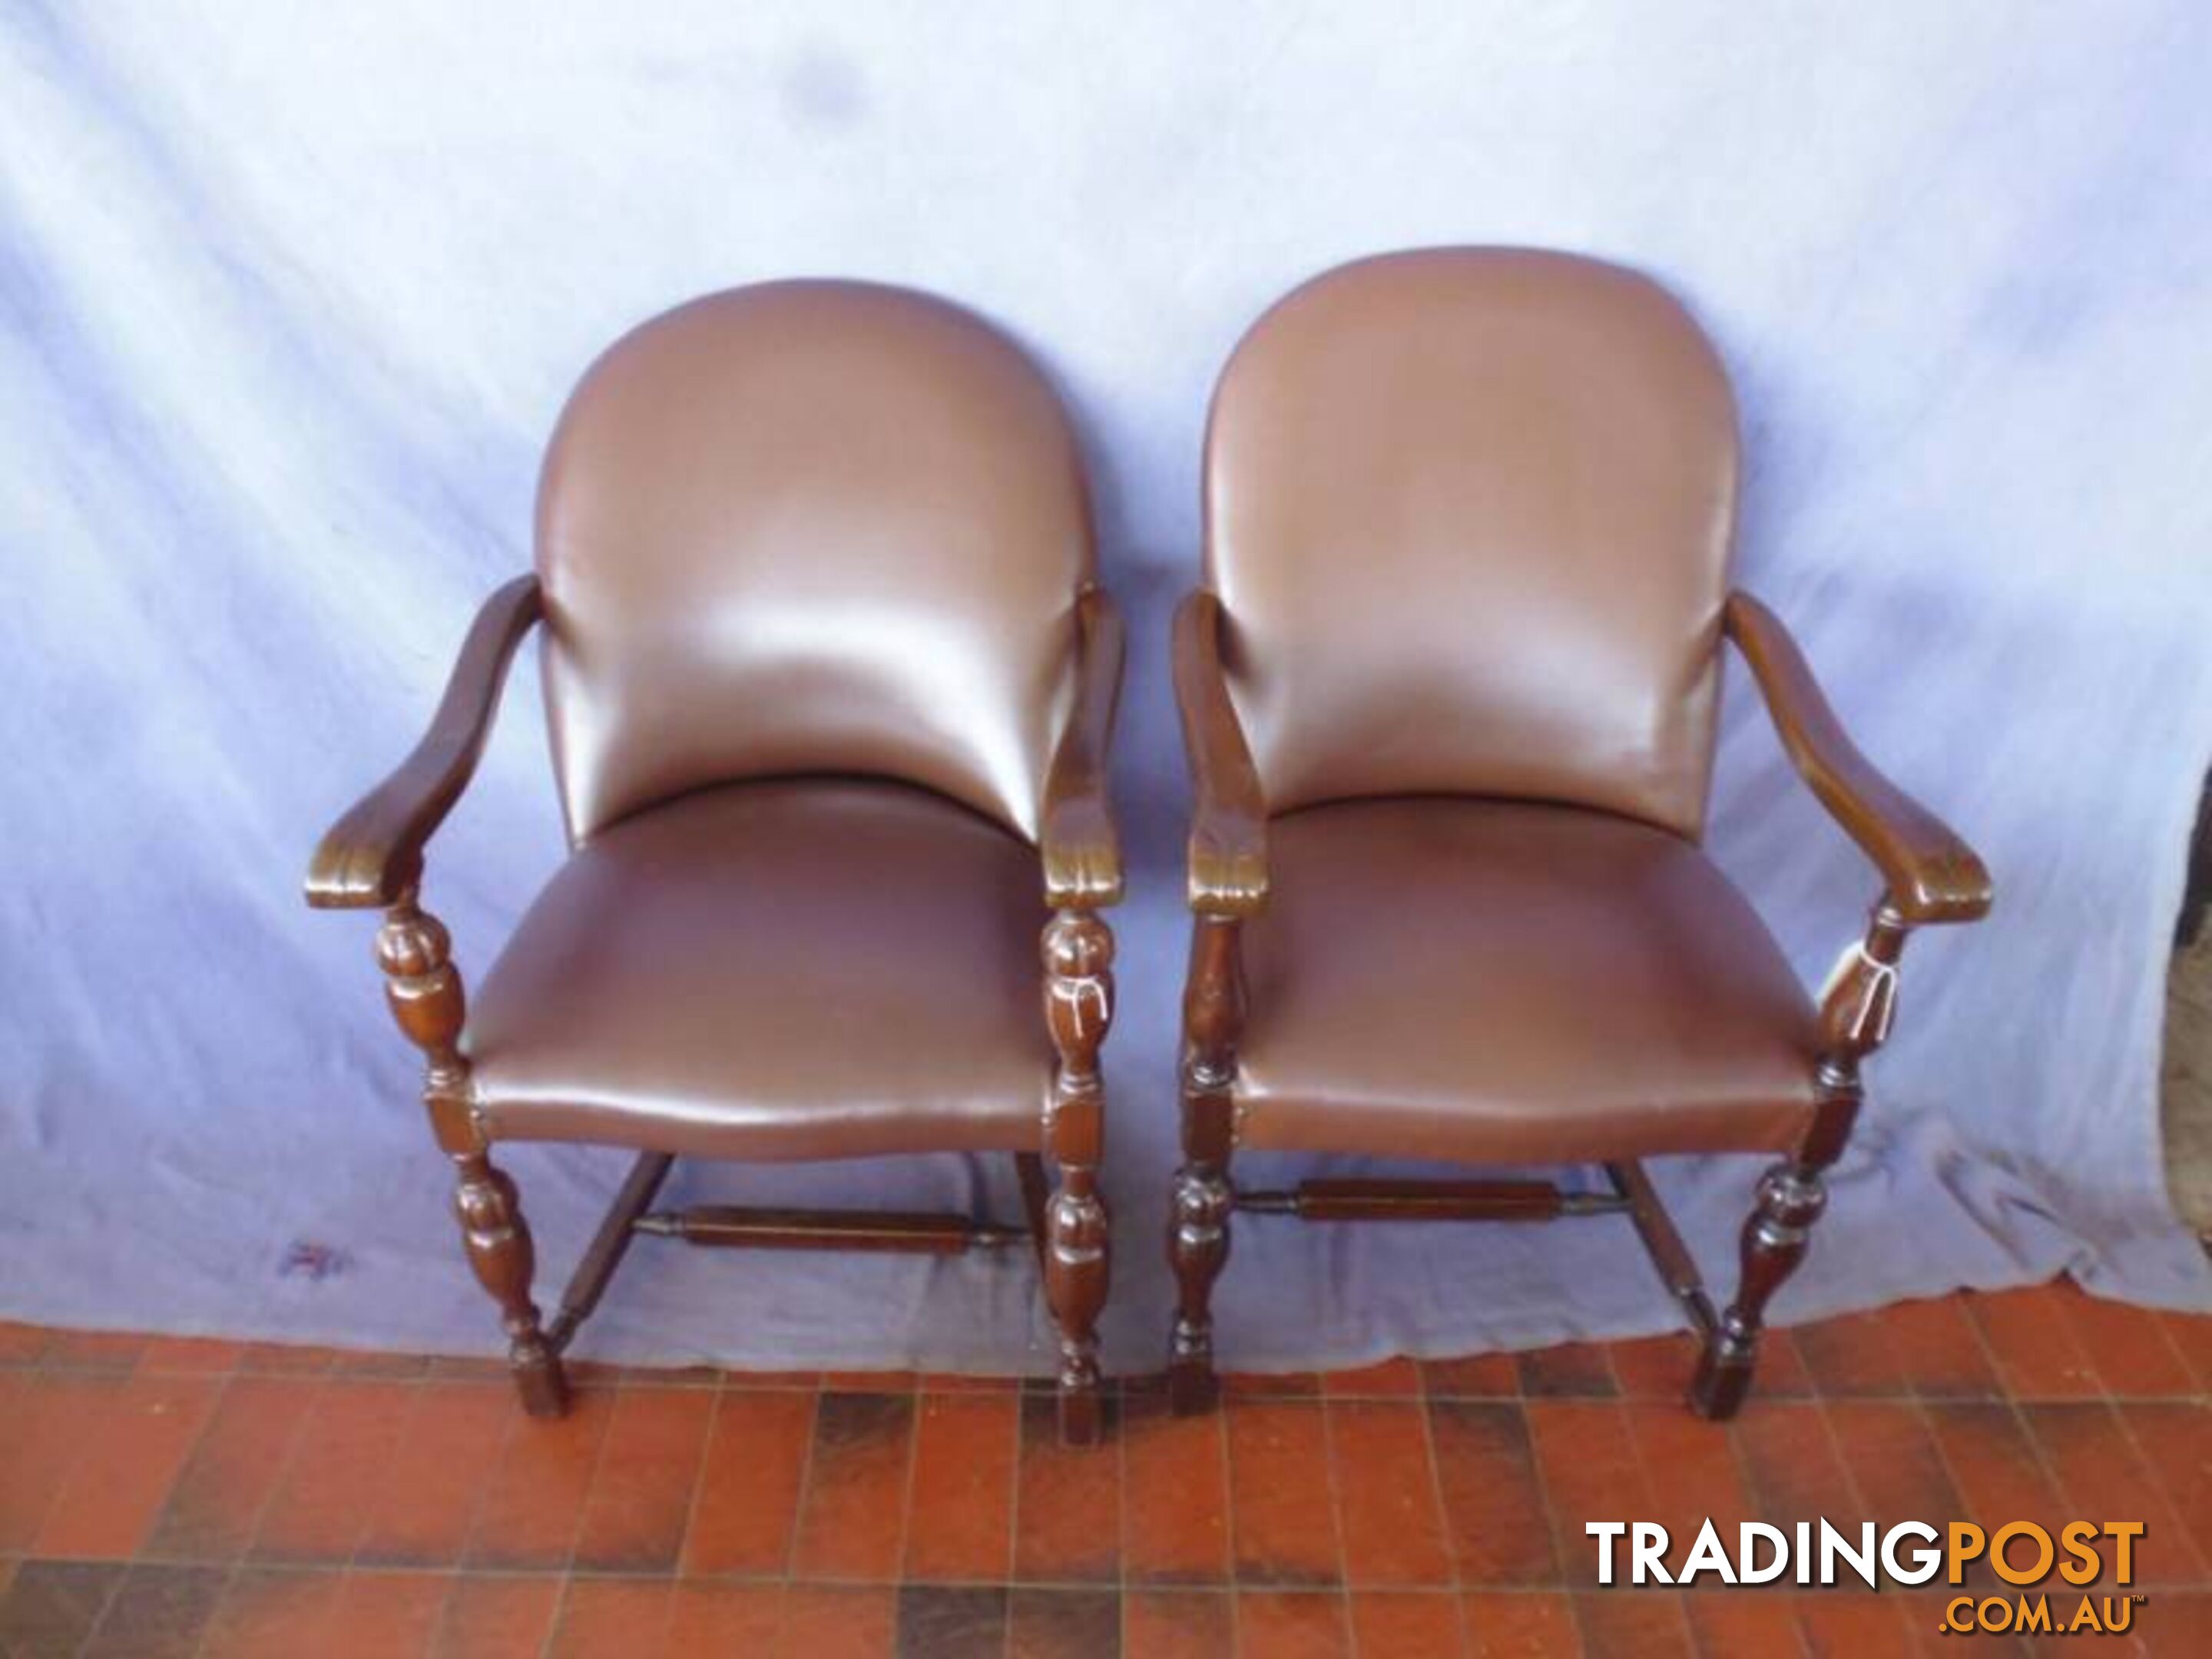 Chairs x2, Brown, Wooden Arms, 369137